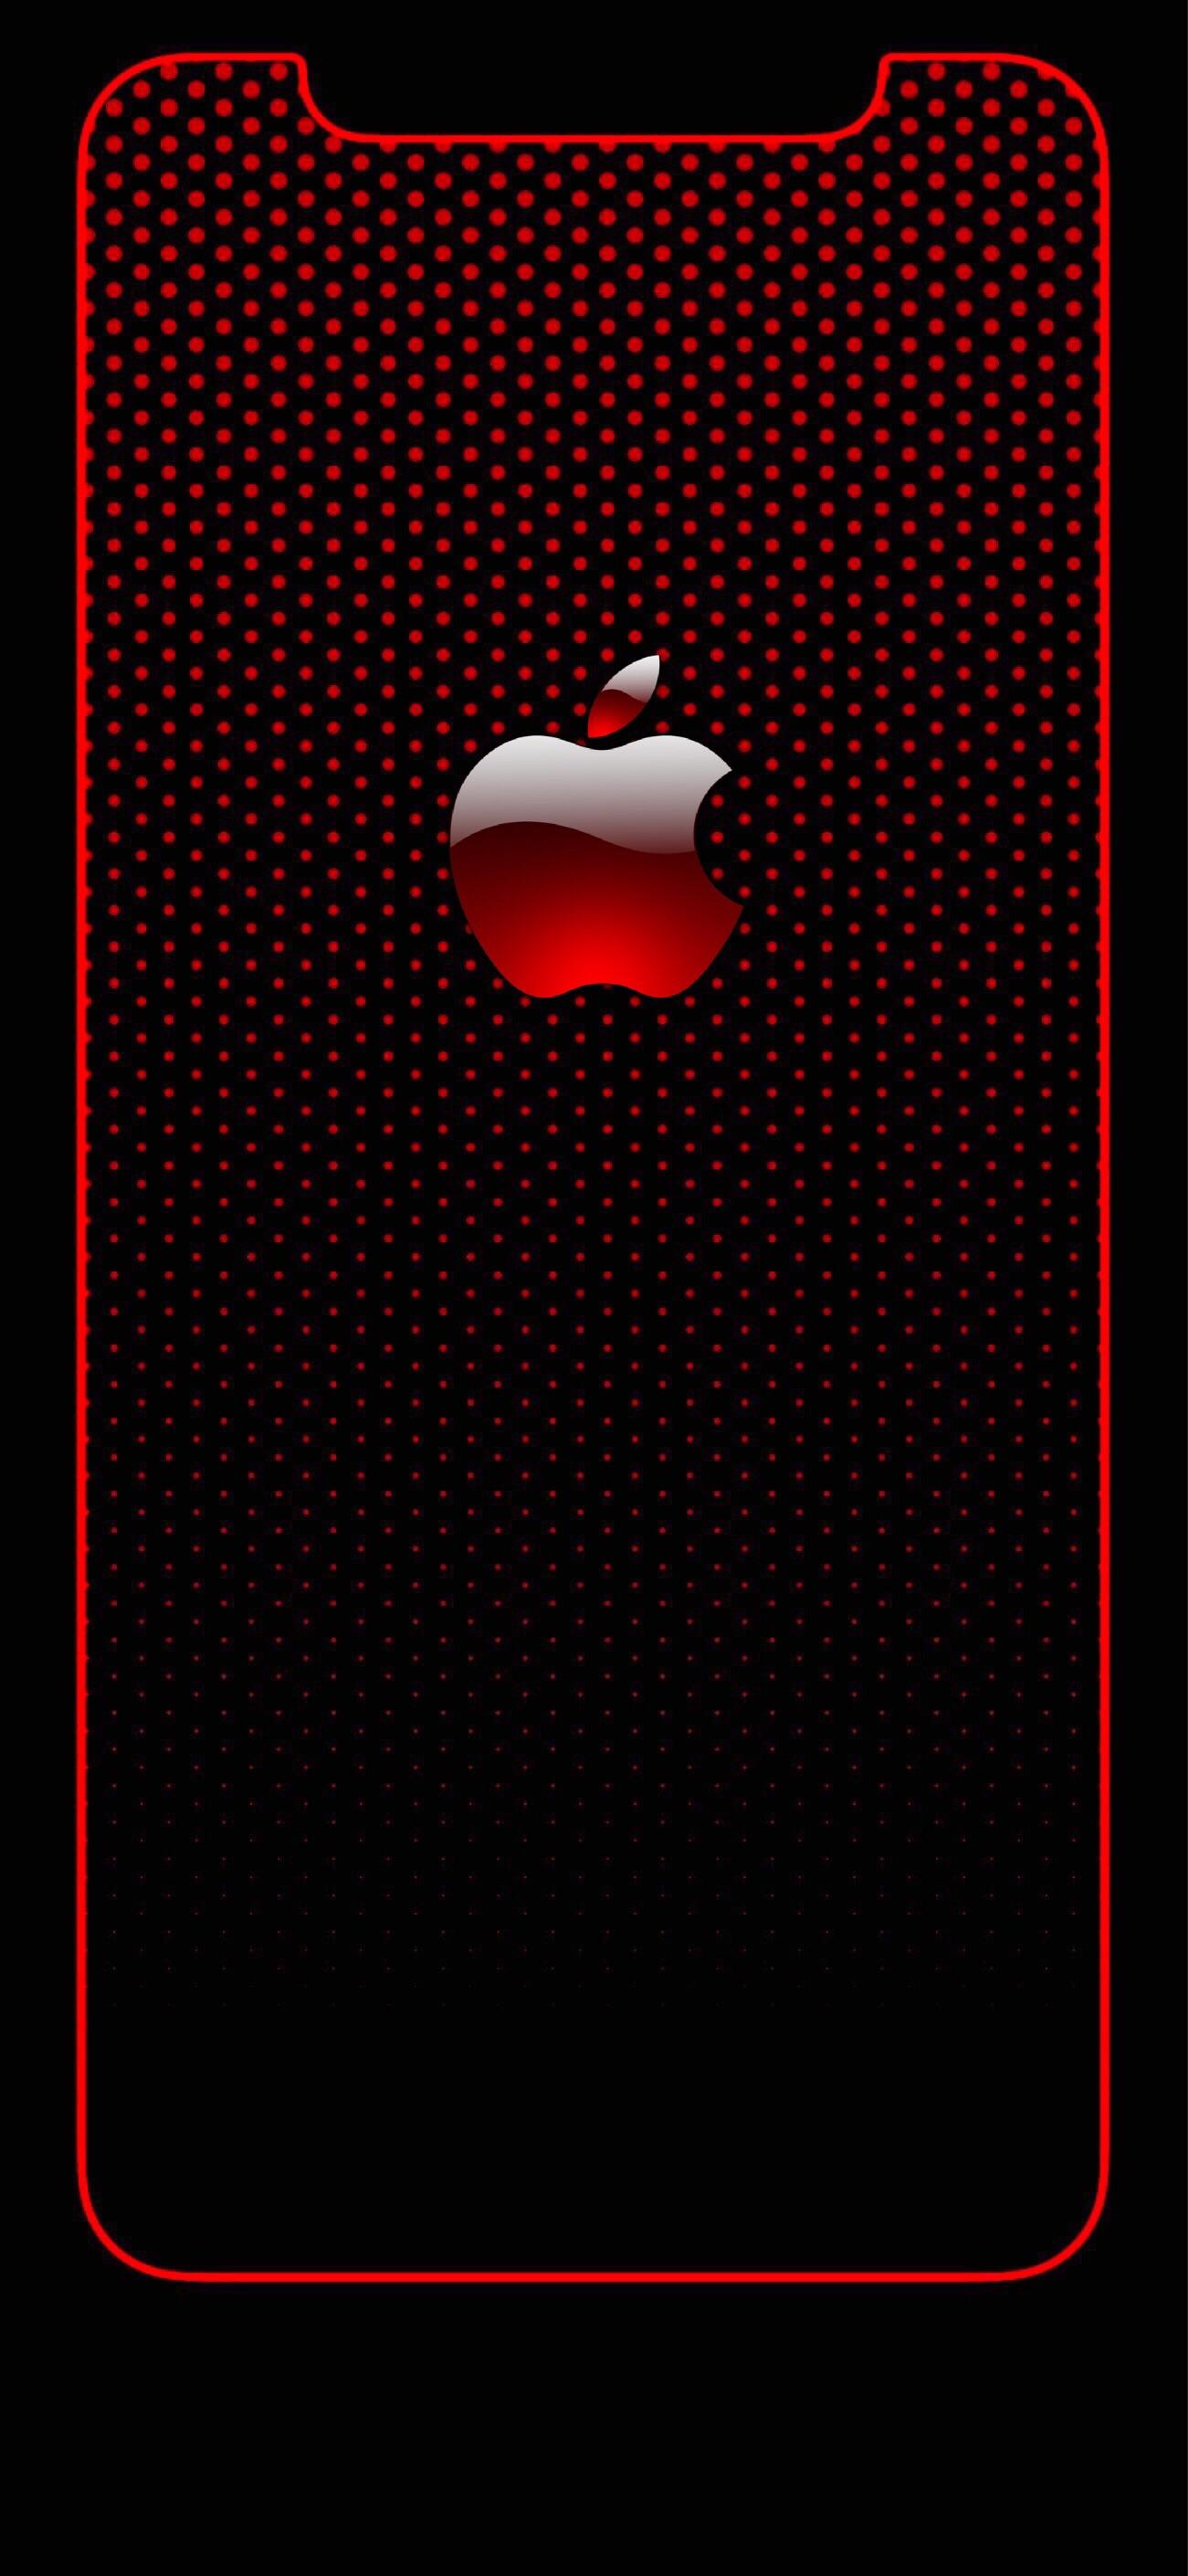 Red Apple Logo Wallpapers Top Free Red Apple Logo Backgrounds Wallpaperaccess